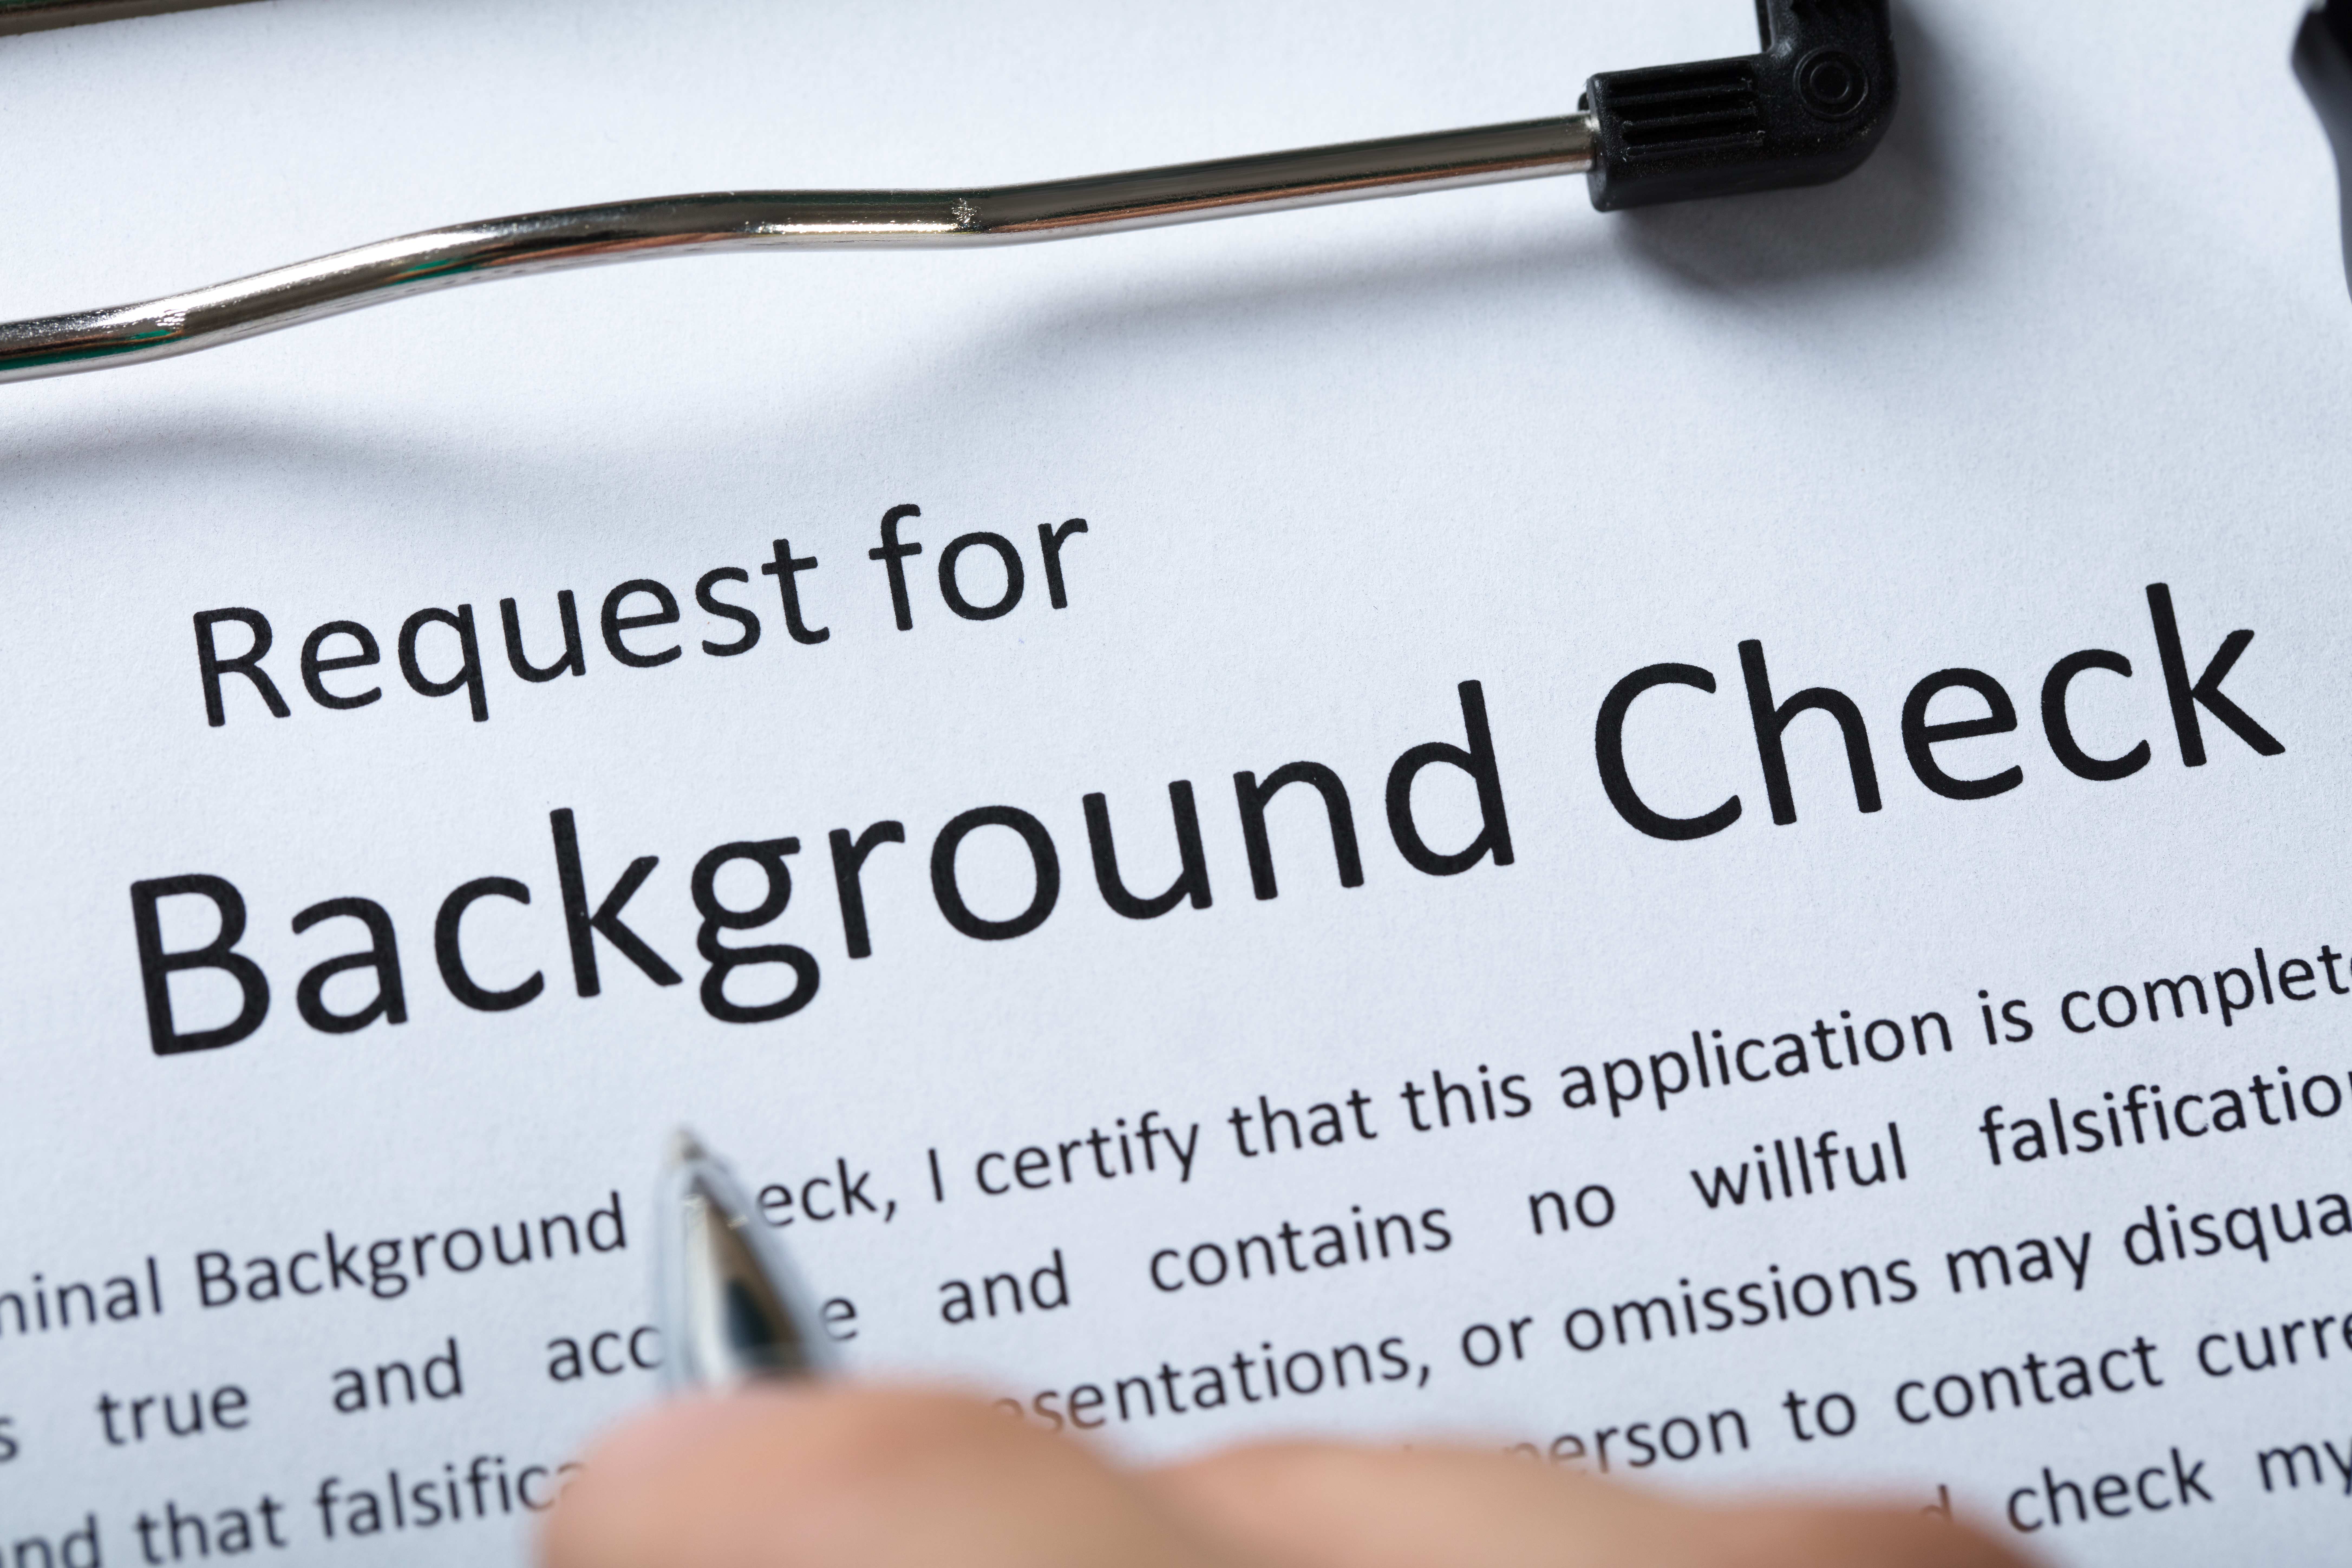 Background Checks, Credit Reports, and OnSite Inspections for Consumer Reporting